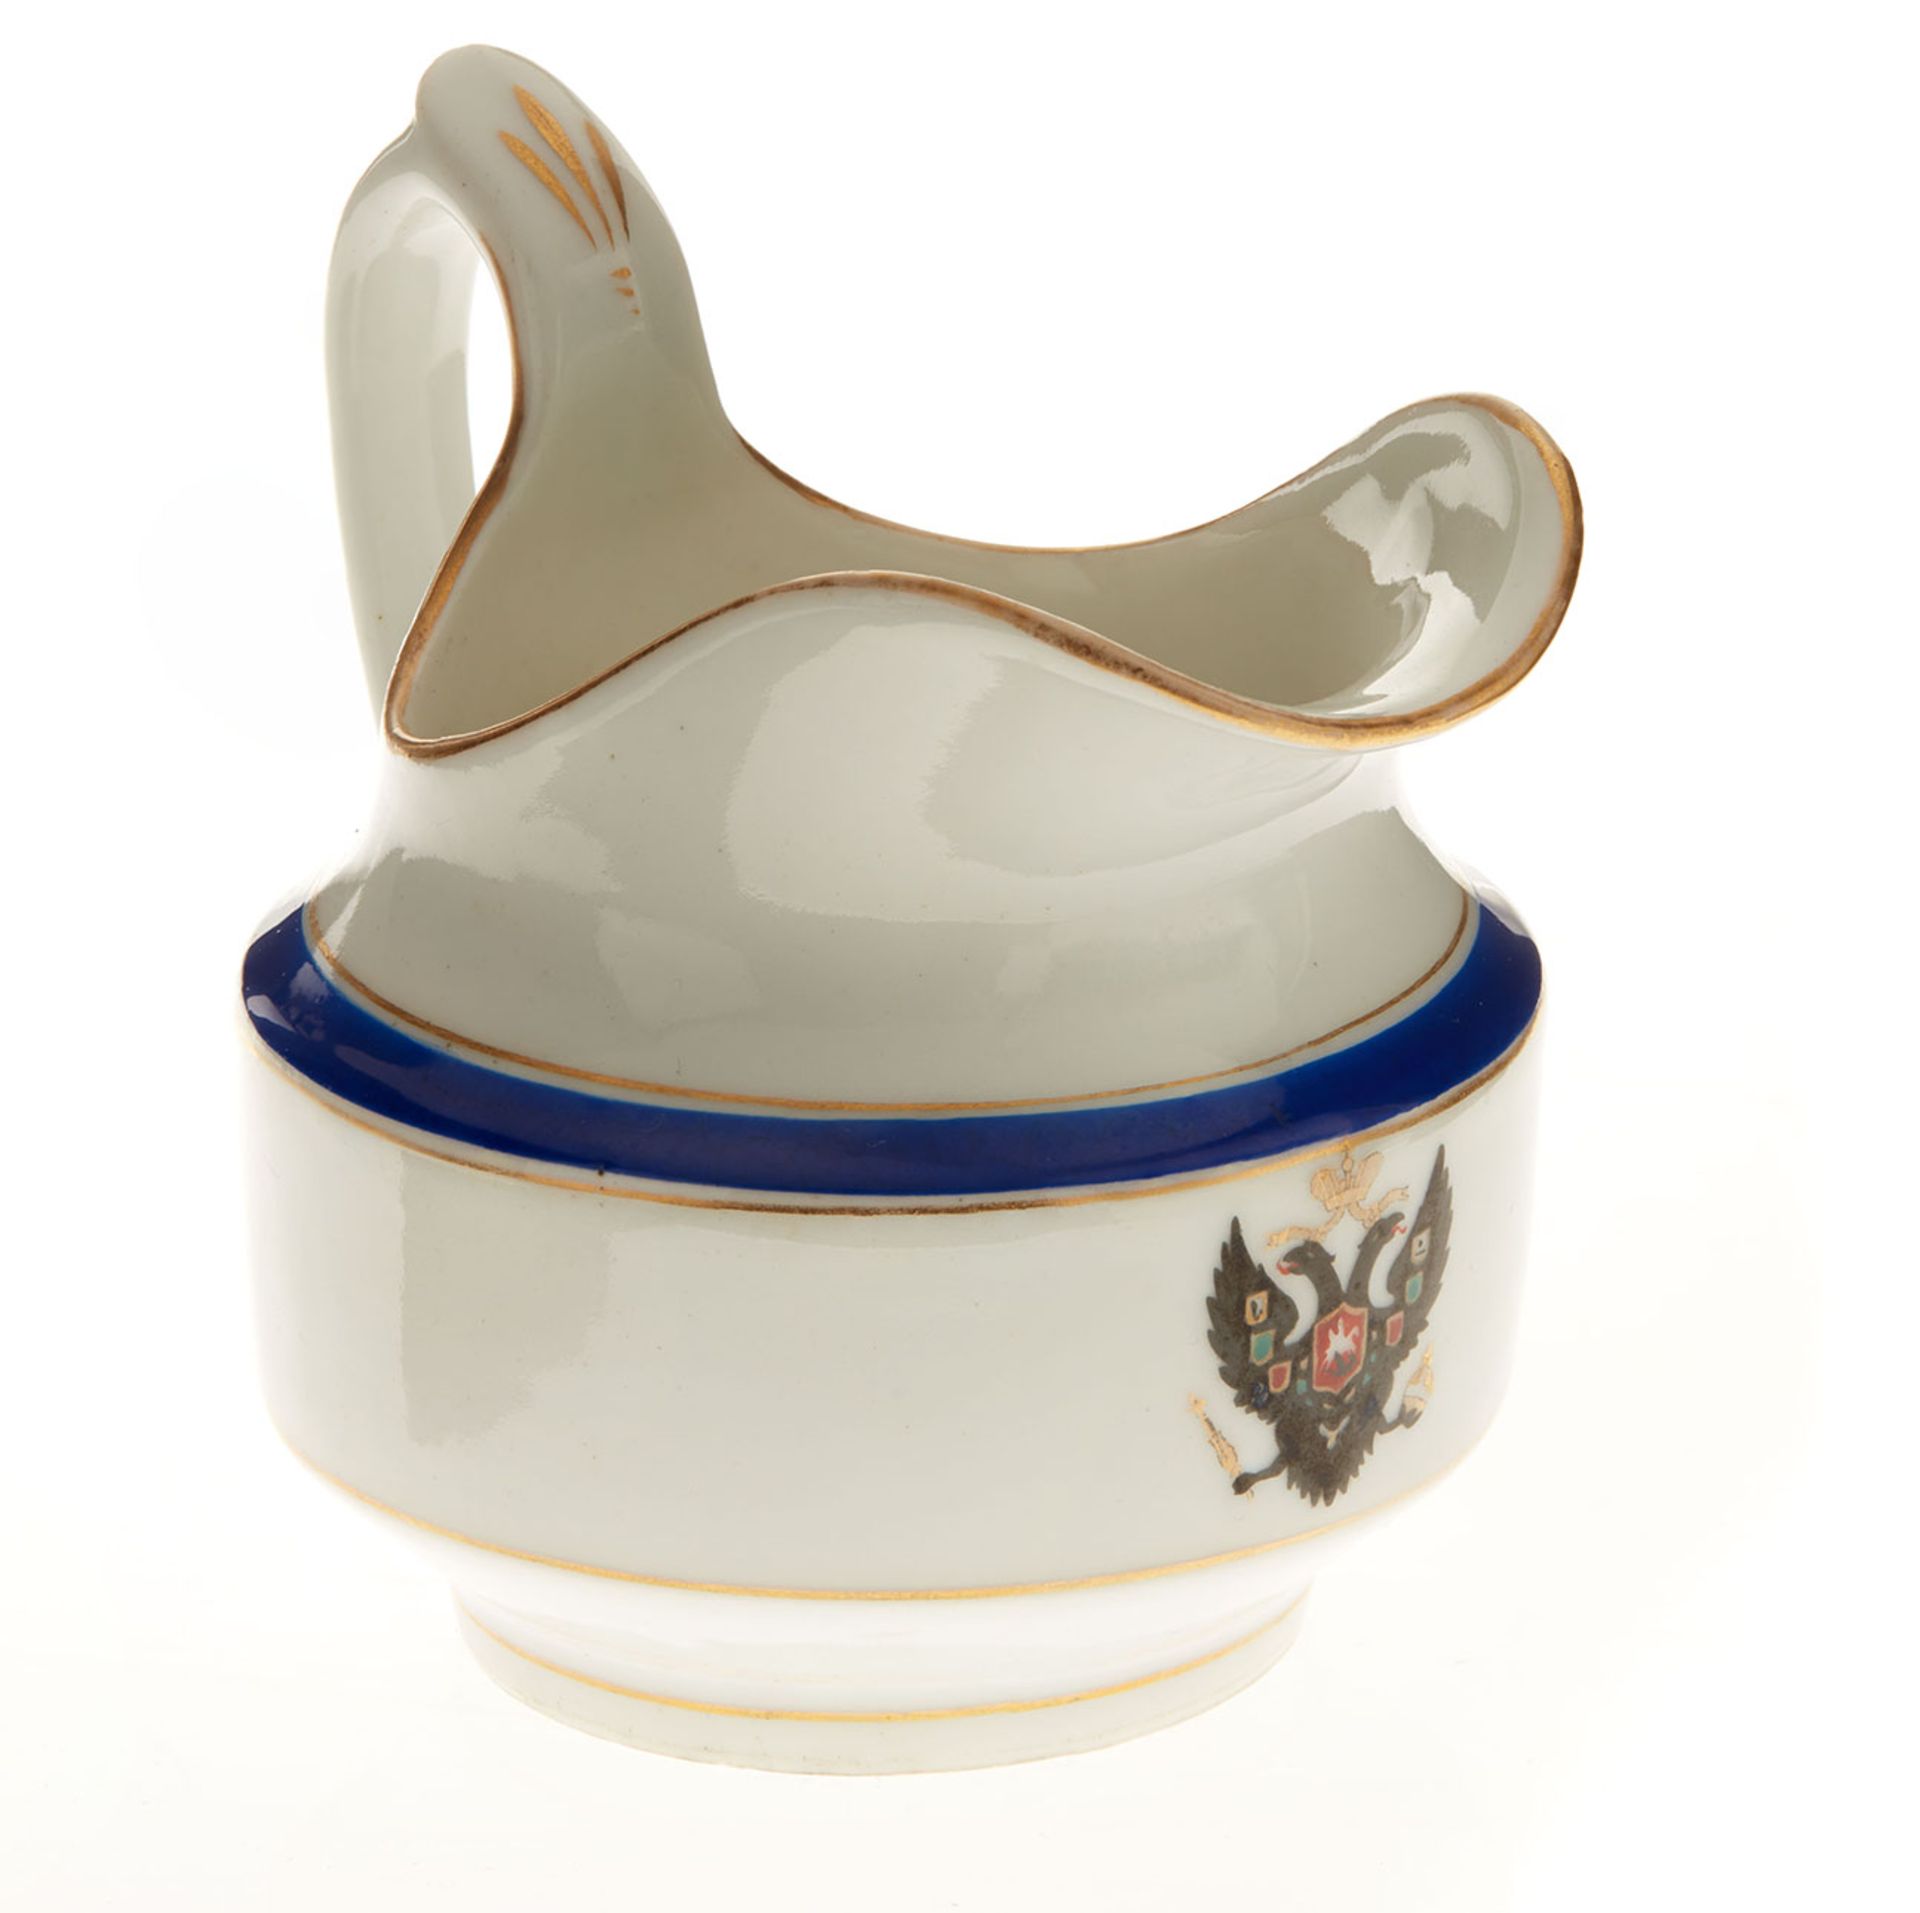 ILK JAR FROM THE SERVICE ‘WITH COAT OF ARMS, BLUE LINE AND GILDED RIMS’ - ALSO [...]